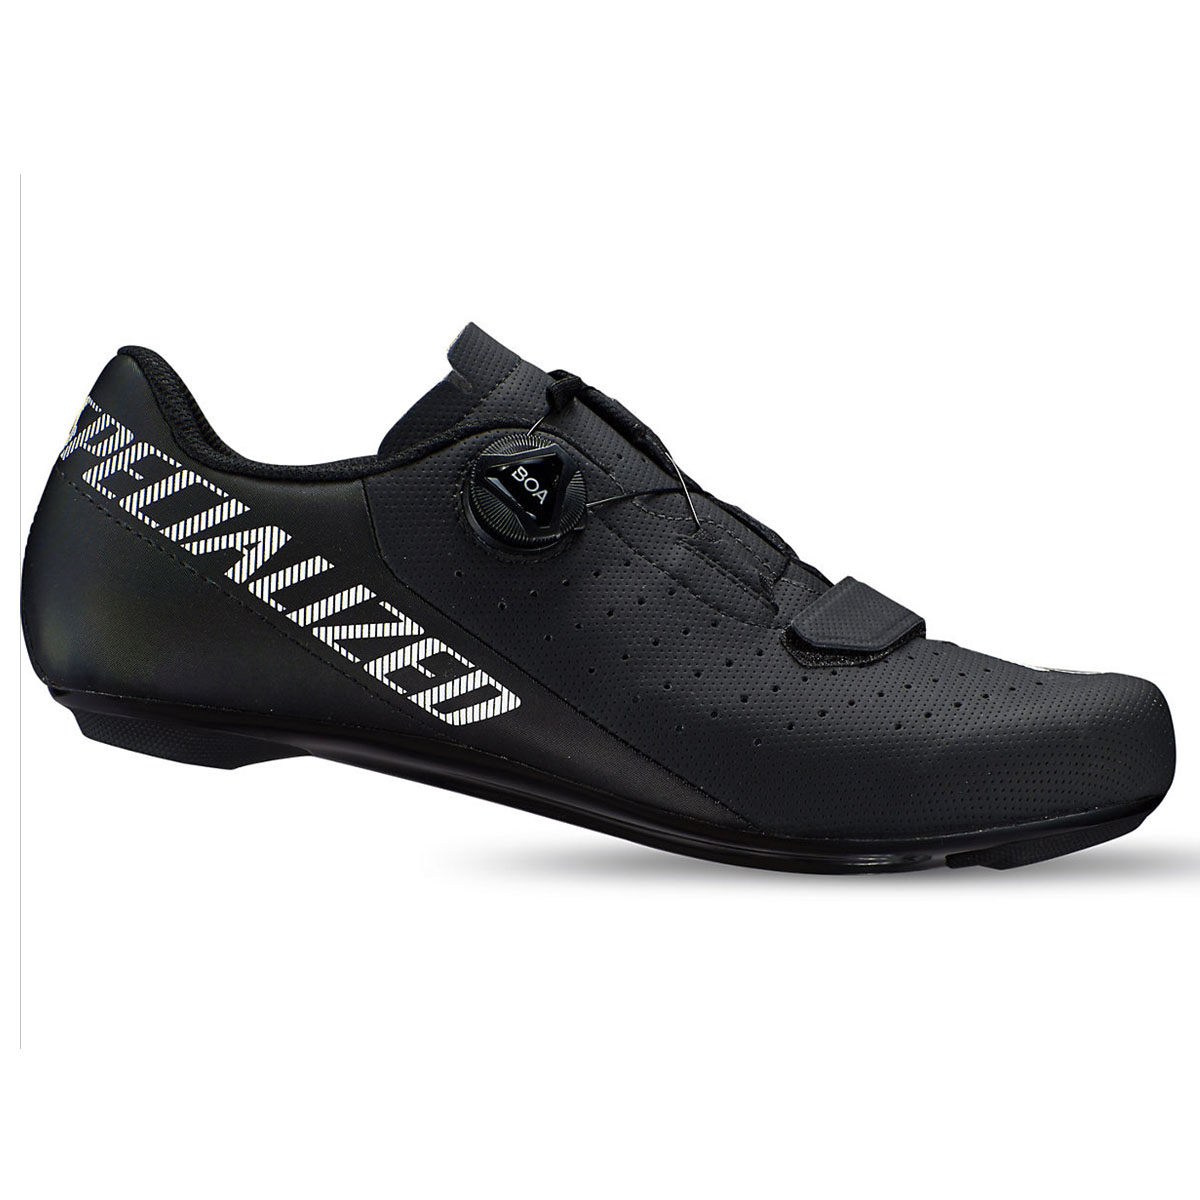 CHAUSSURES SPECIALIZED TORCH 1.0 BOA